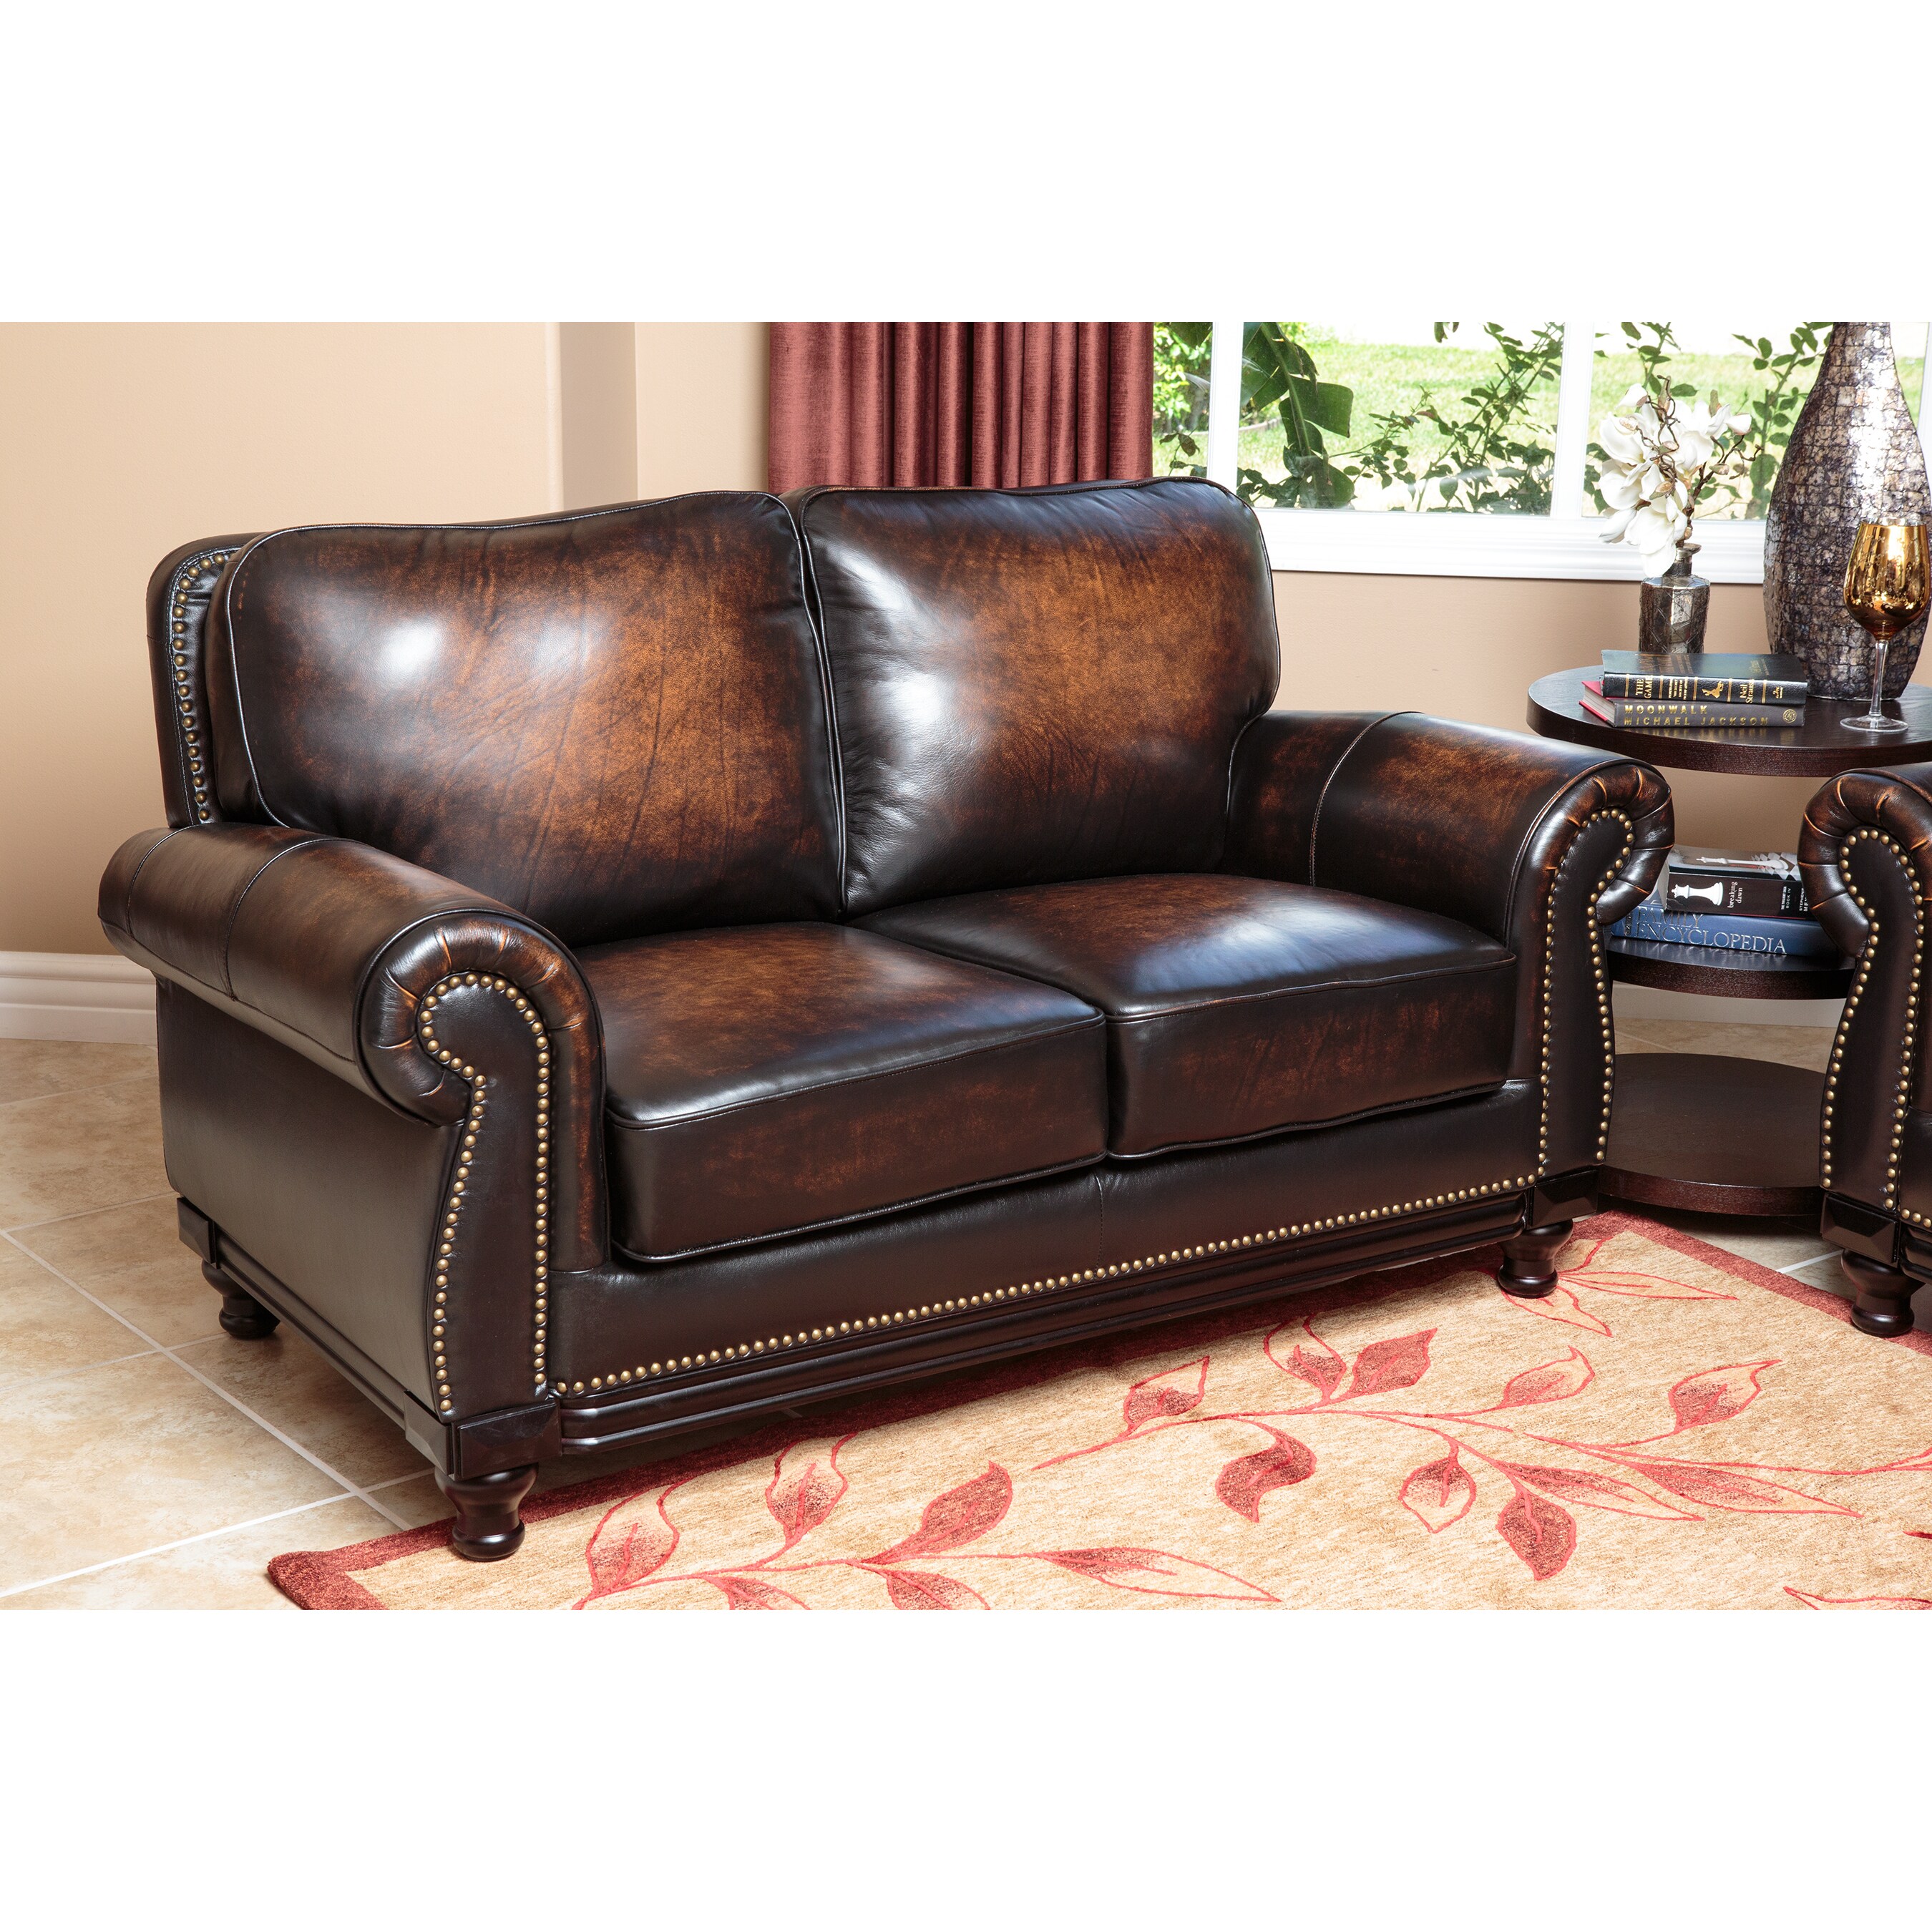 https://ak1.ostkcdn.com/images/products/6475667/Abbyson-Living-Palermo-Woodtrim-Hand-rubbed-Leather-Sofa-Loveseat-and-Armchair-f4b7819e-6939-4623-bd67-1972660d7ba3.jpg